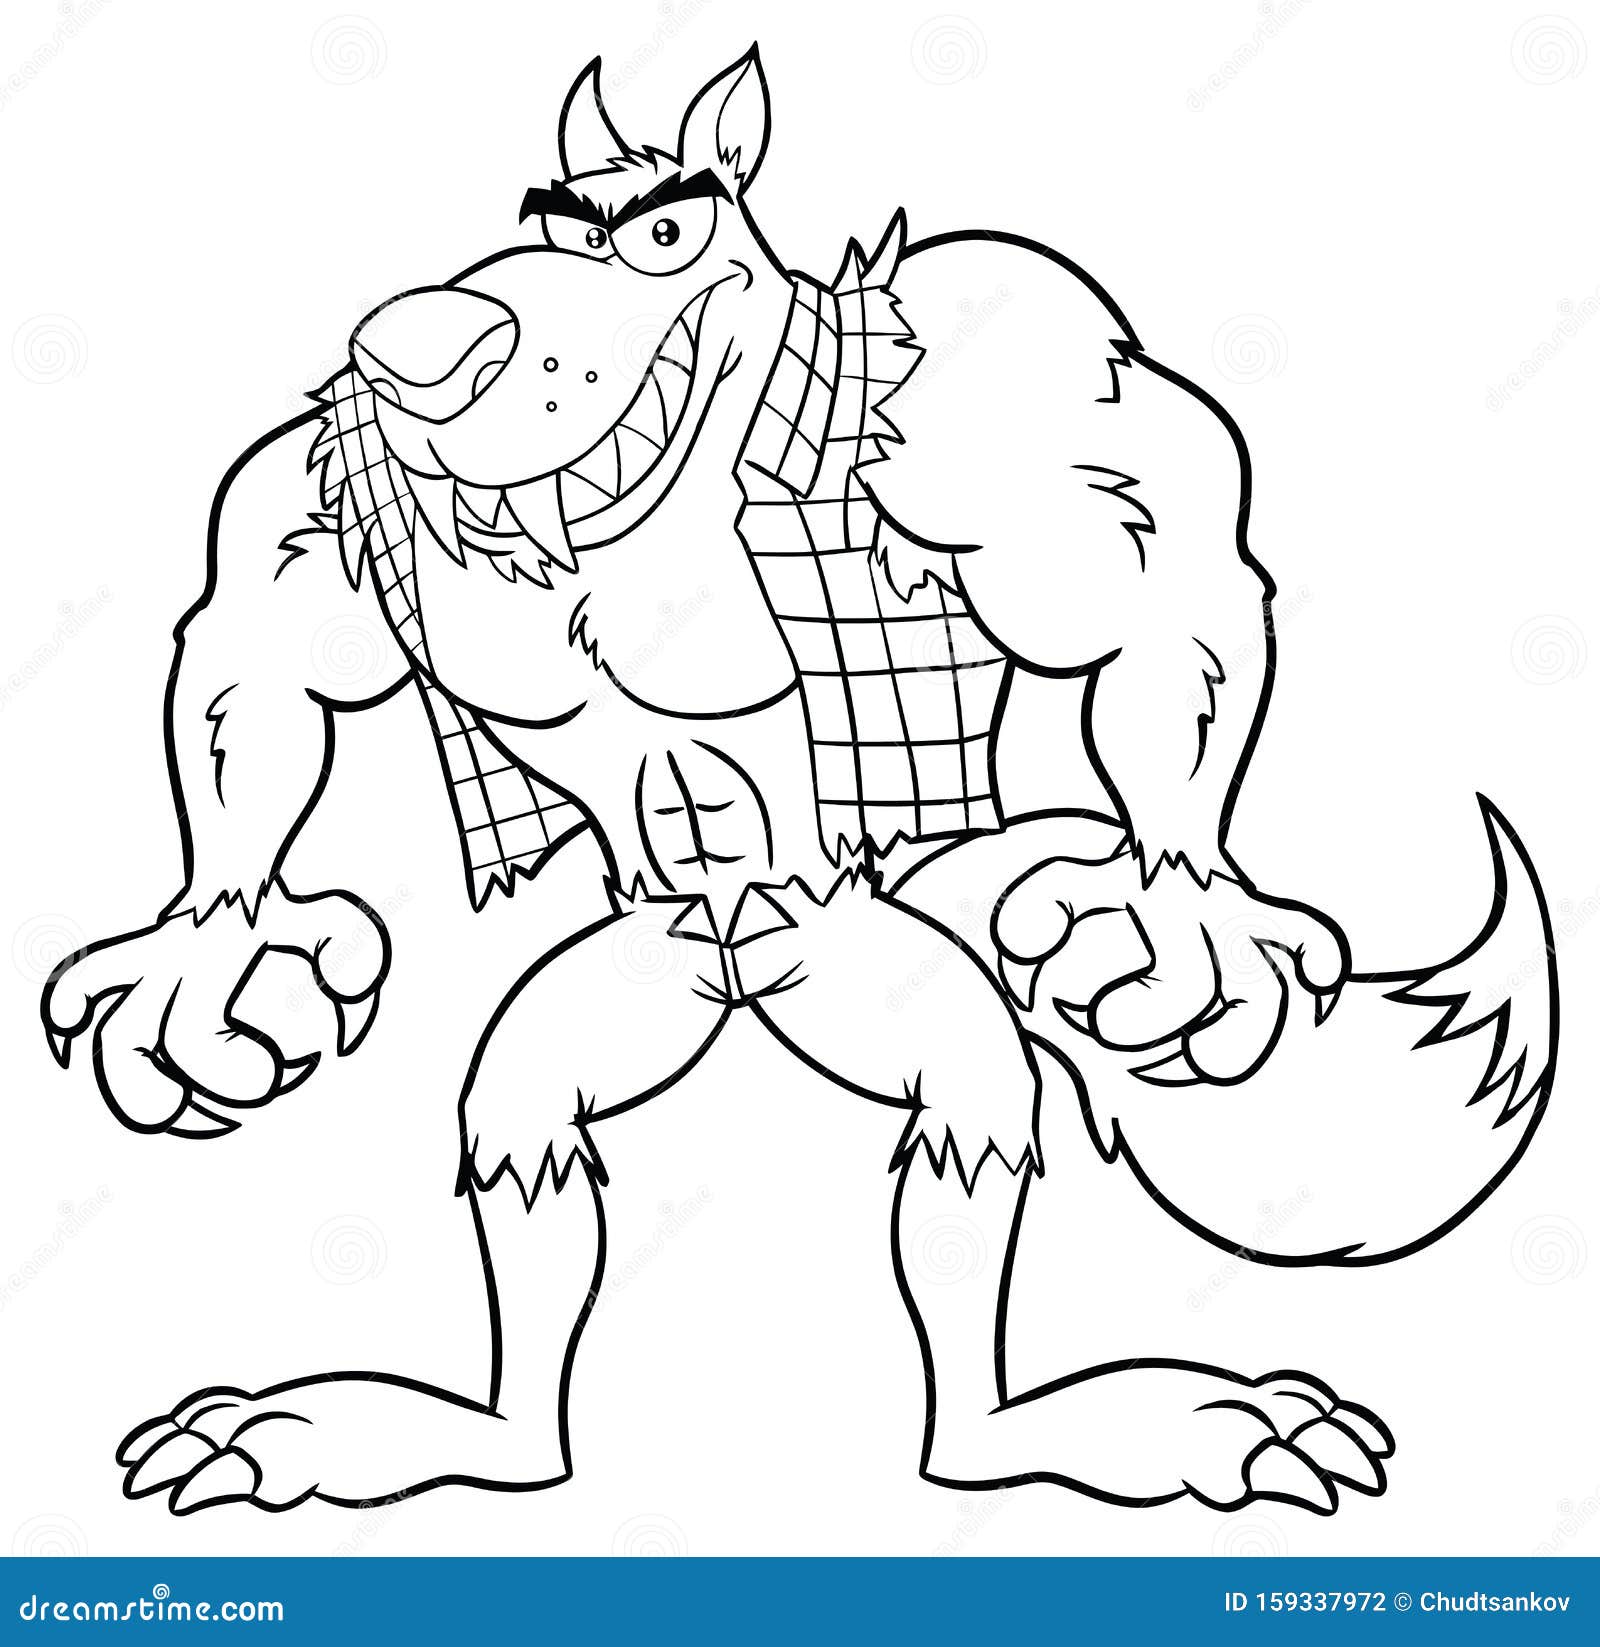 Werewolf Cartoon Vector PNG, Vector, PSD, and Clipart With Transparent Background for Free ...